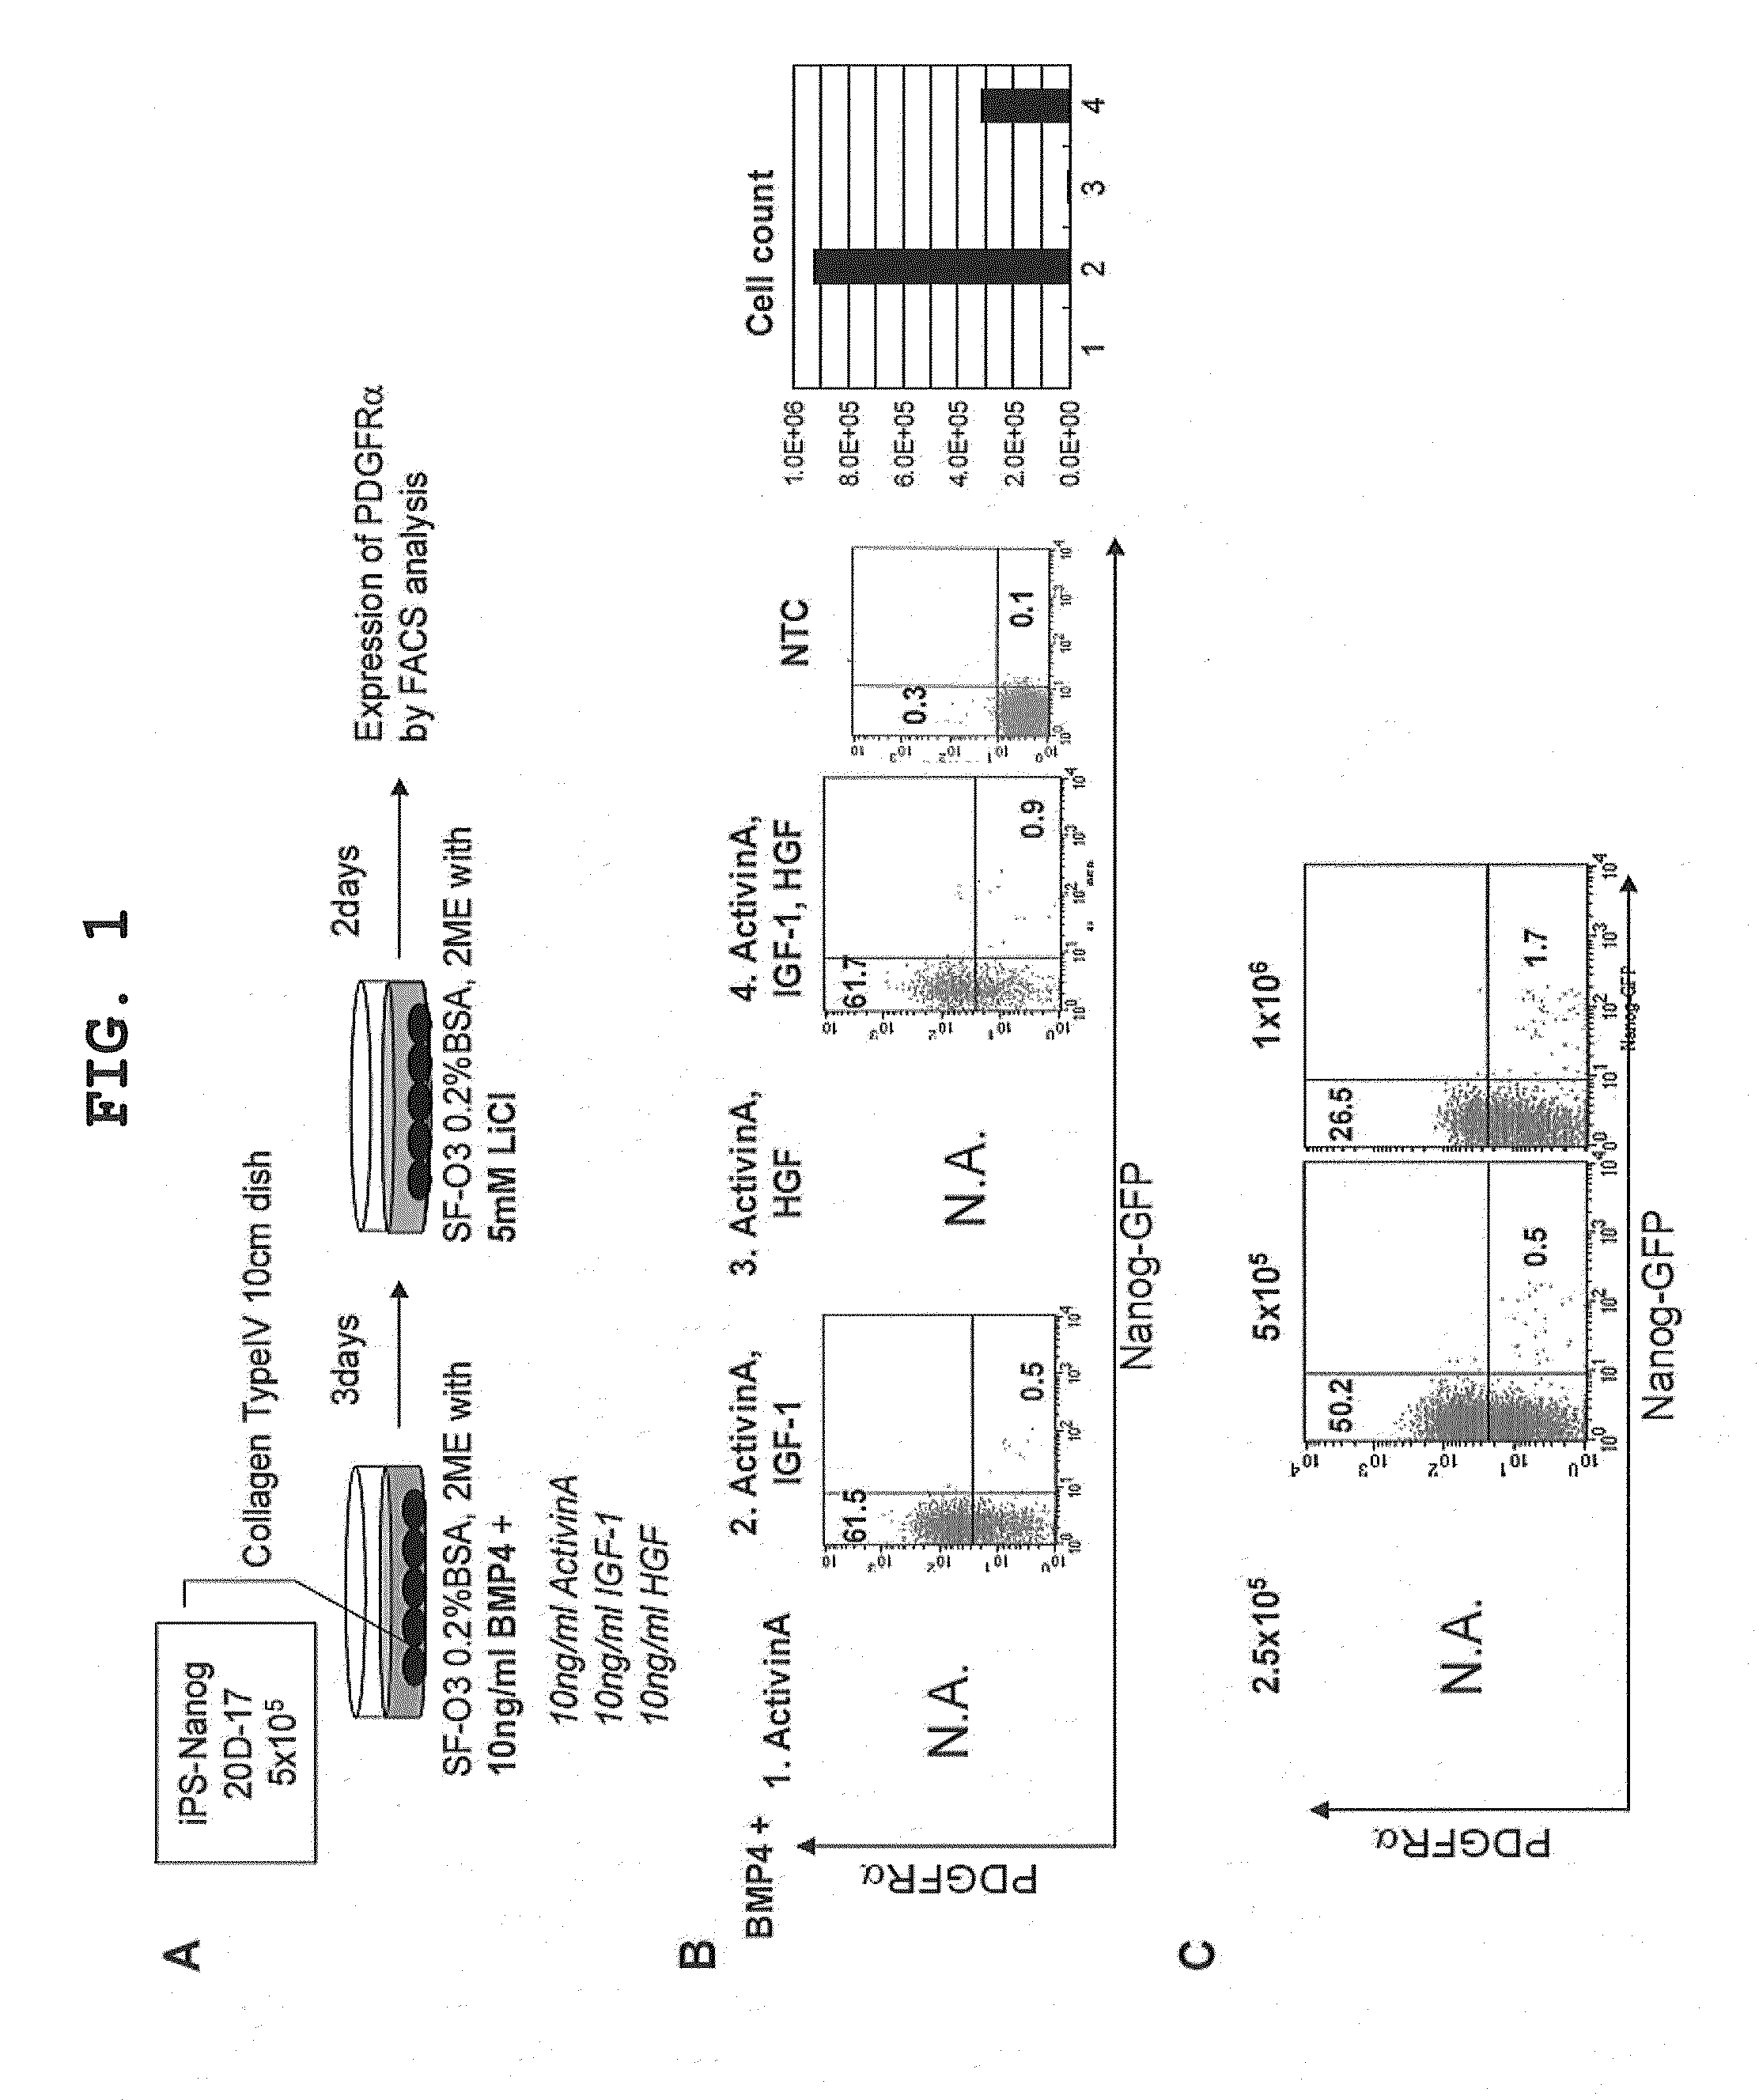 Method of inducing differentiation from pluripotent stem cells to skeletal muscle progenitor cells